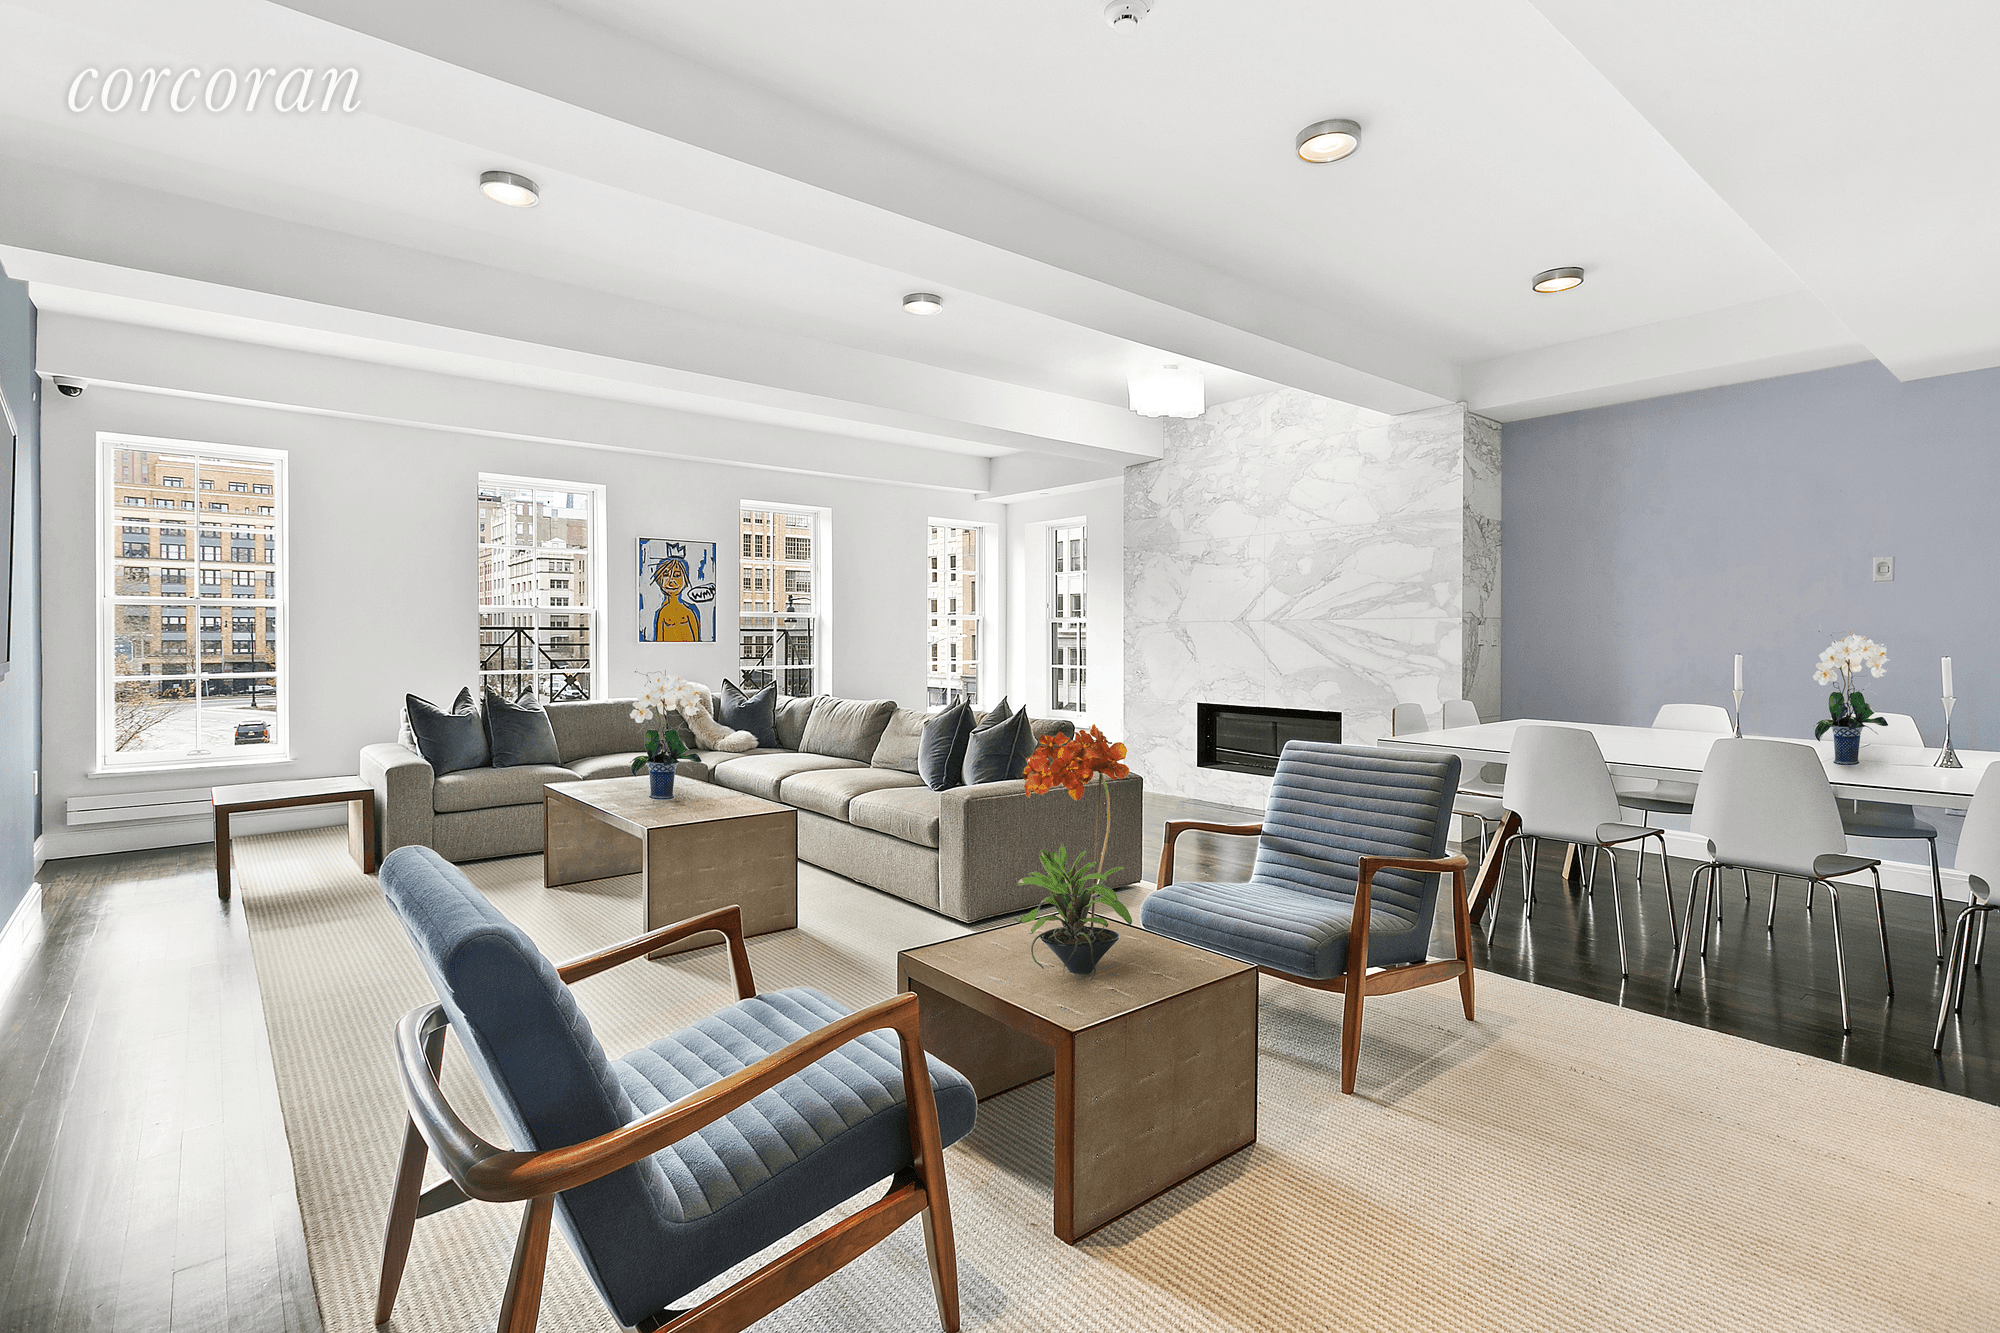 Stretch out and relax in comfort and style in this magnificent five bedroom, four and a half bathroom triplex loft nestled on a quintessential Tribeca cobblestone street.